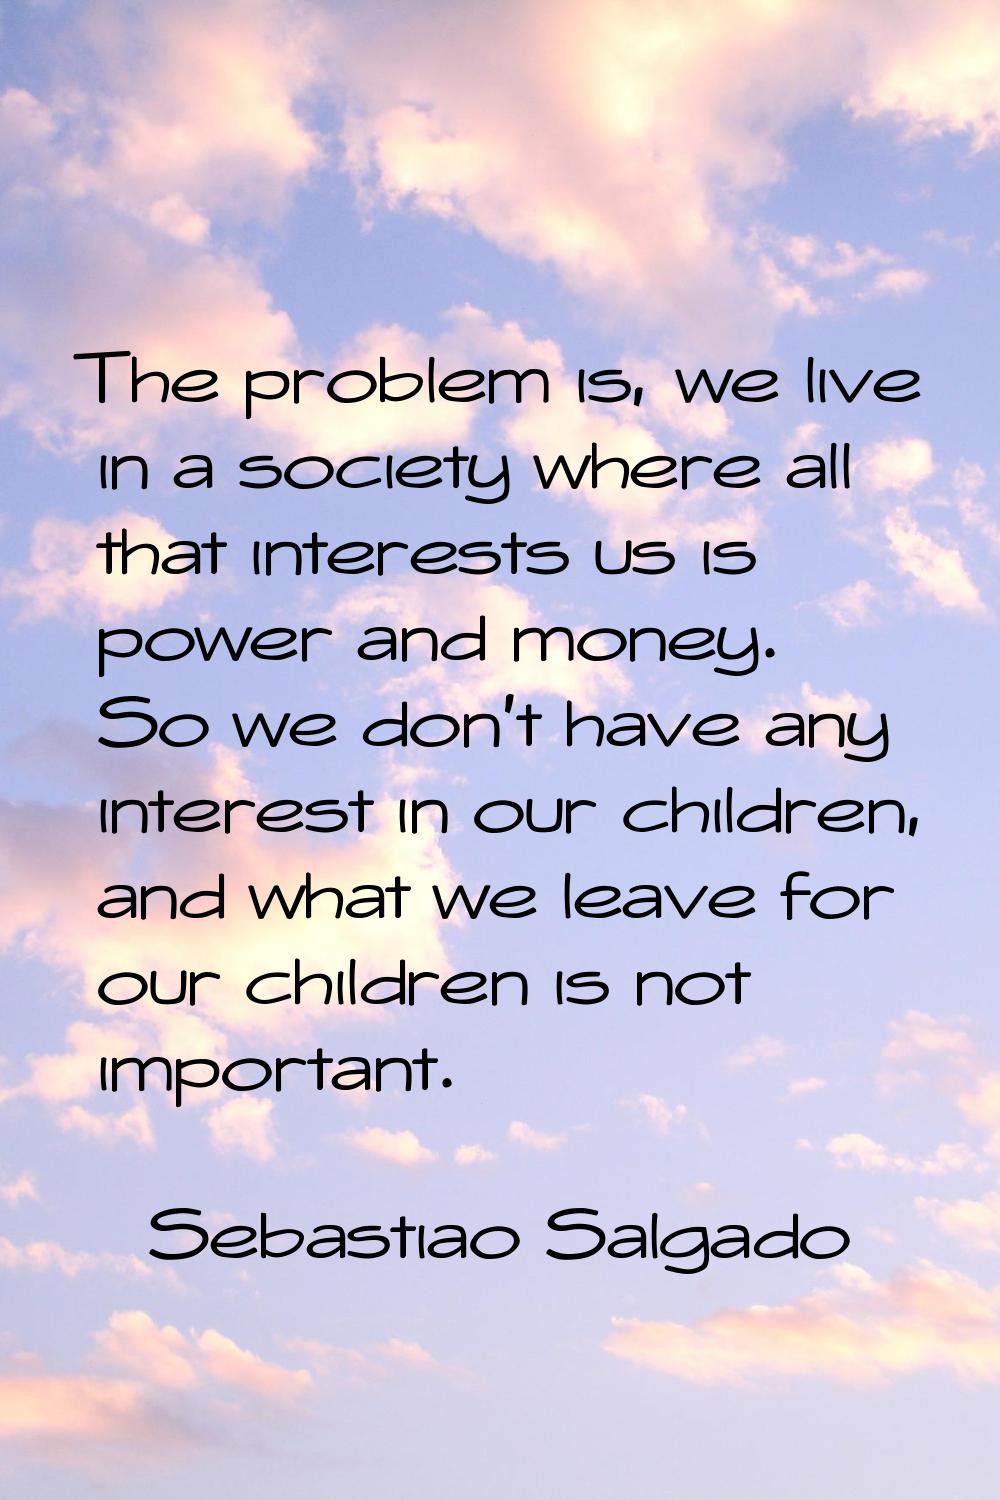 The problem is, we live in a society where all that interests us is power and money. So we don't ha